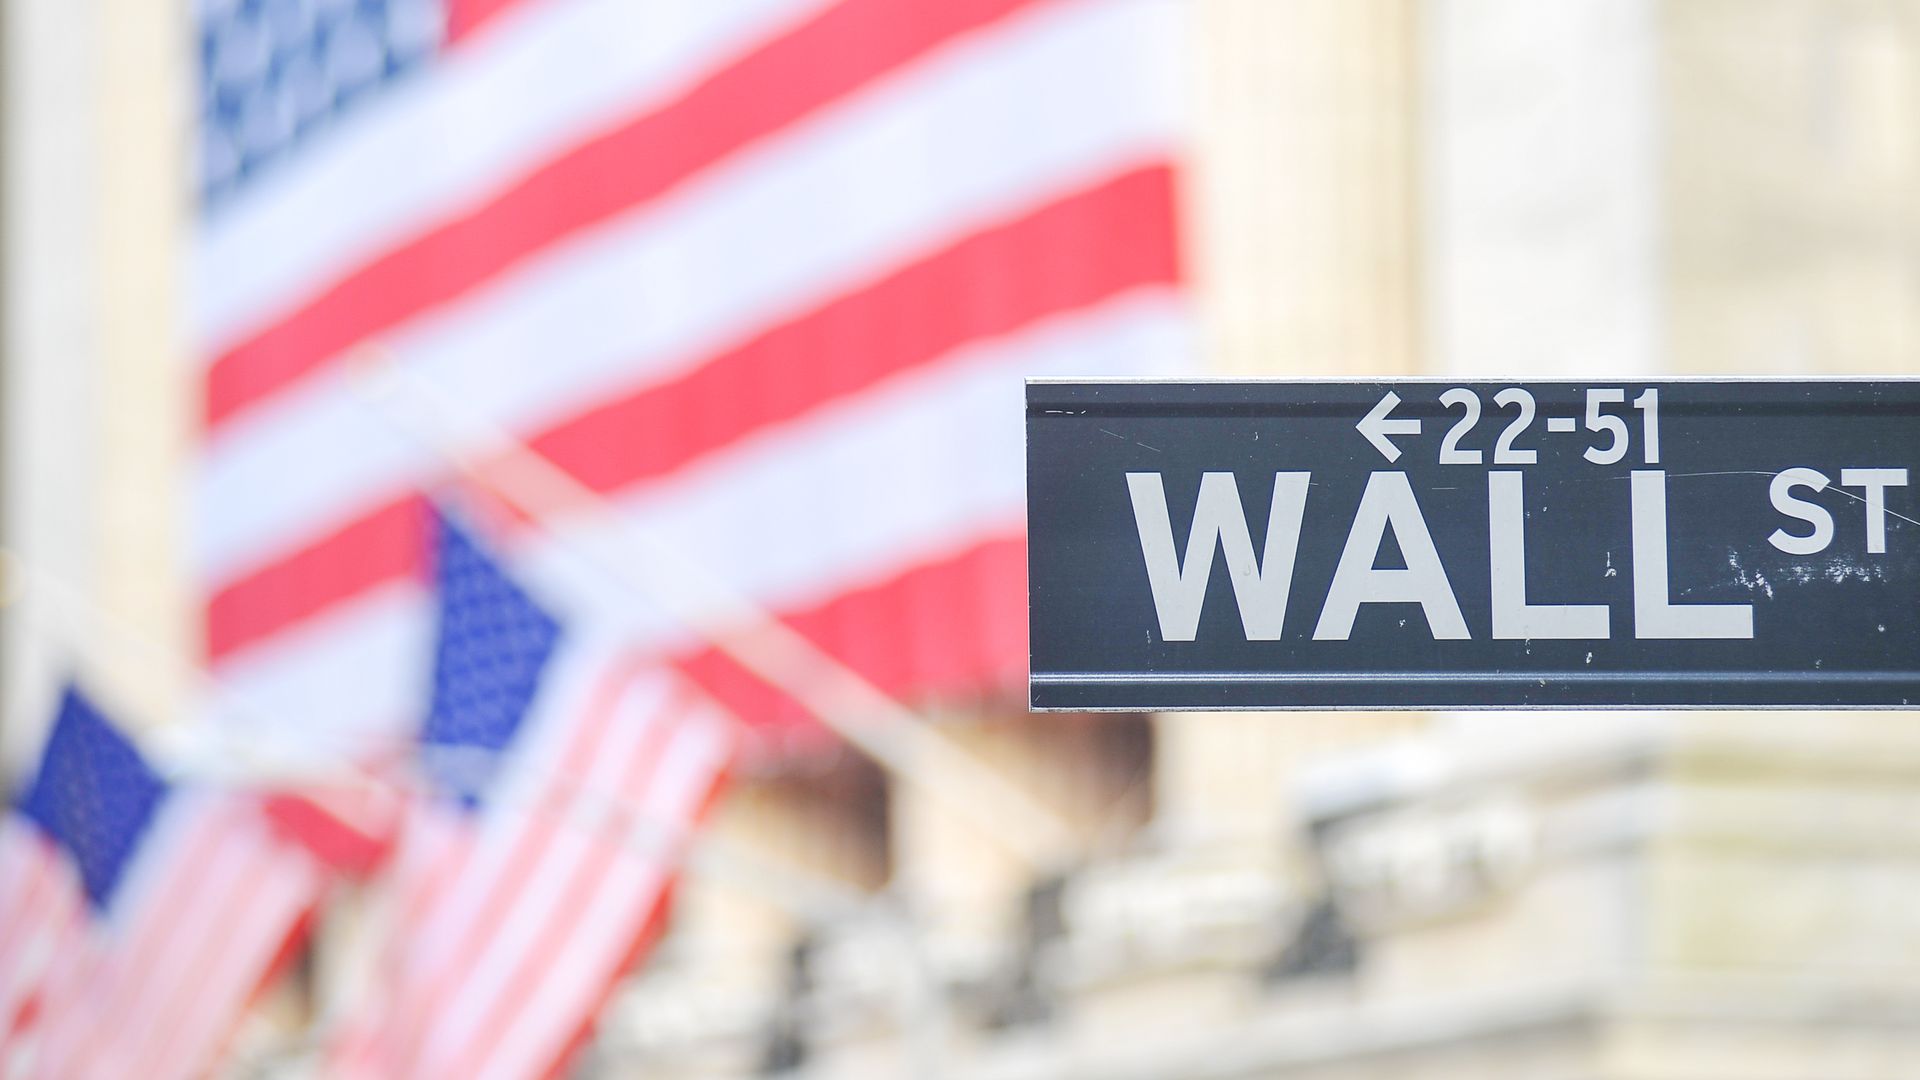 "Wall St." sign outside the New York Stock Exchange